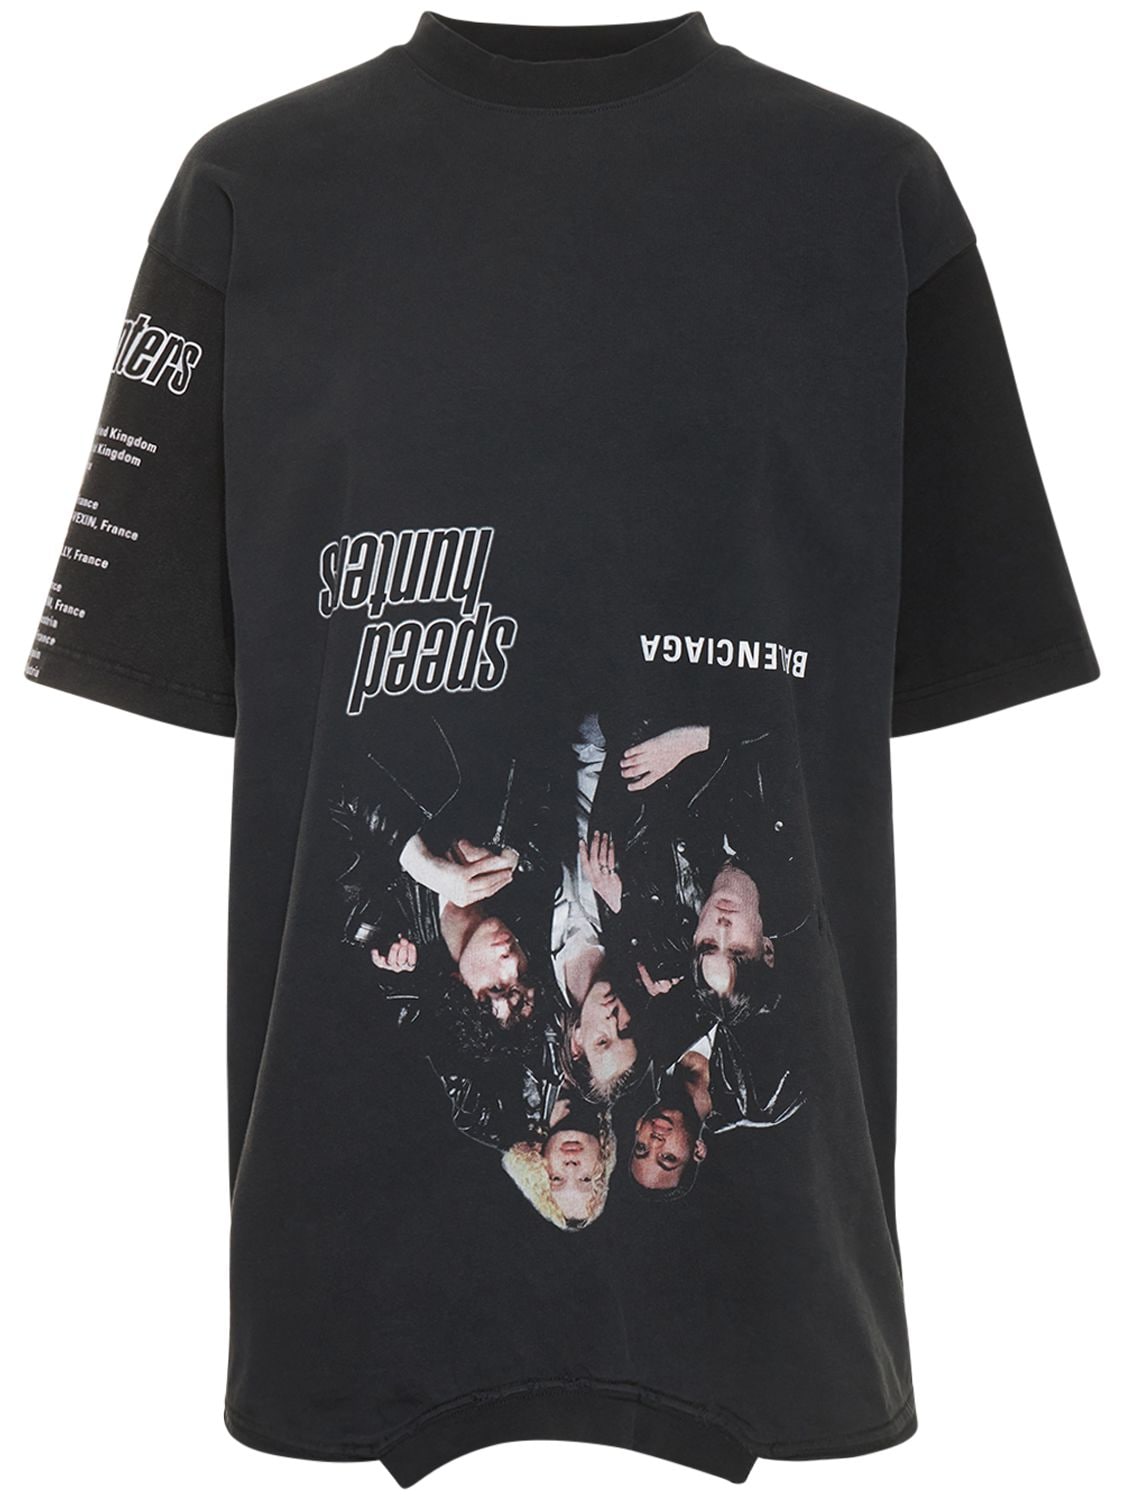 Upside Down Deconstructed T-shirt In Mix Of Black W